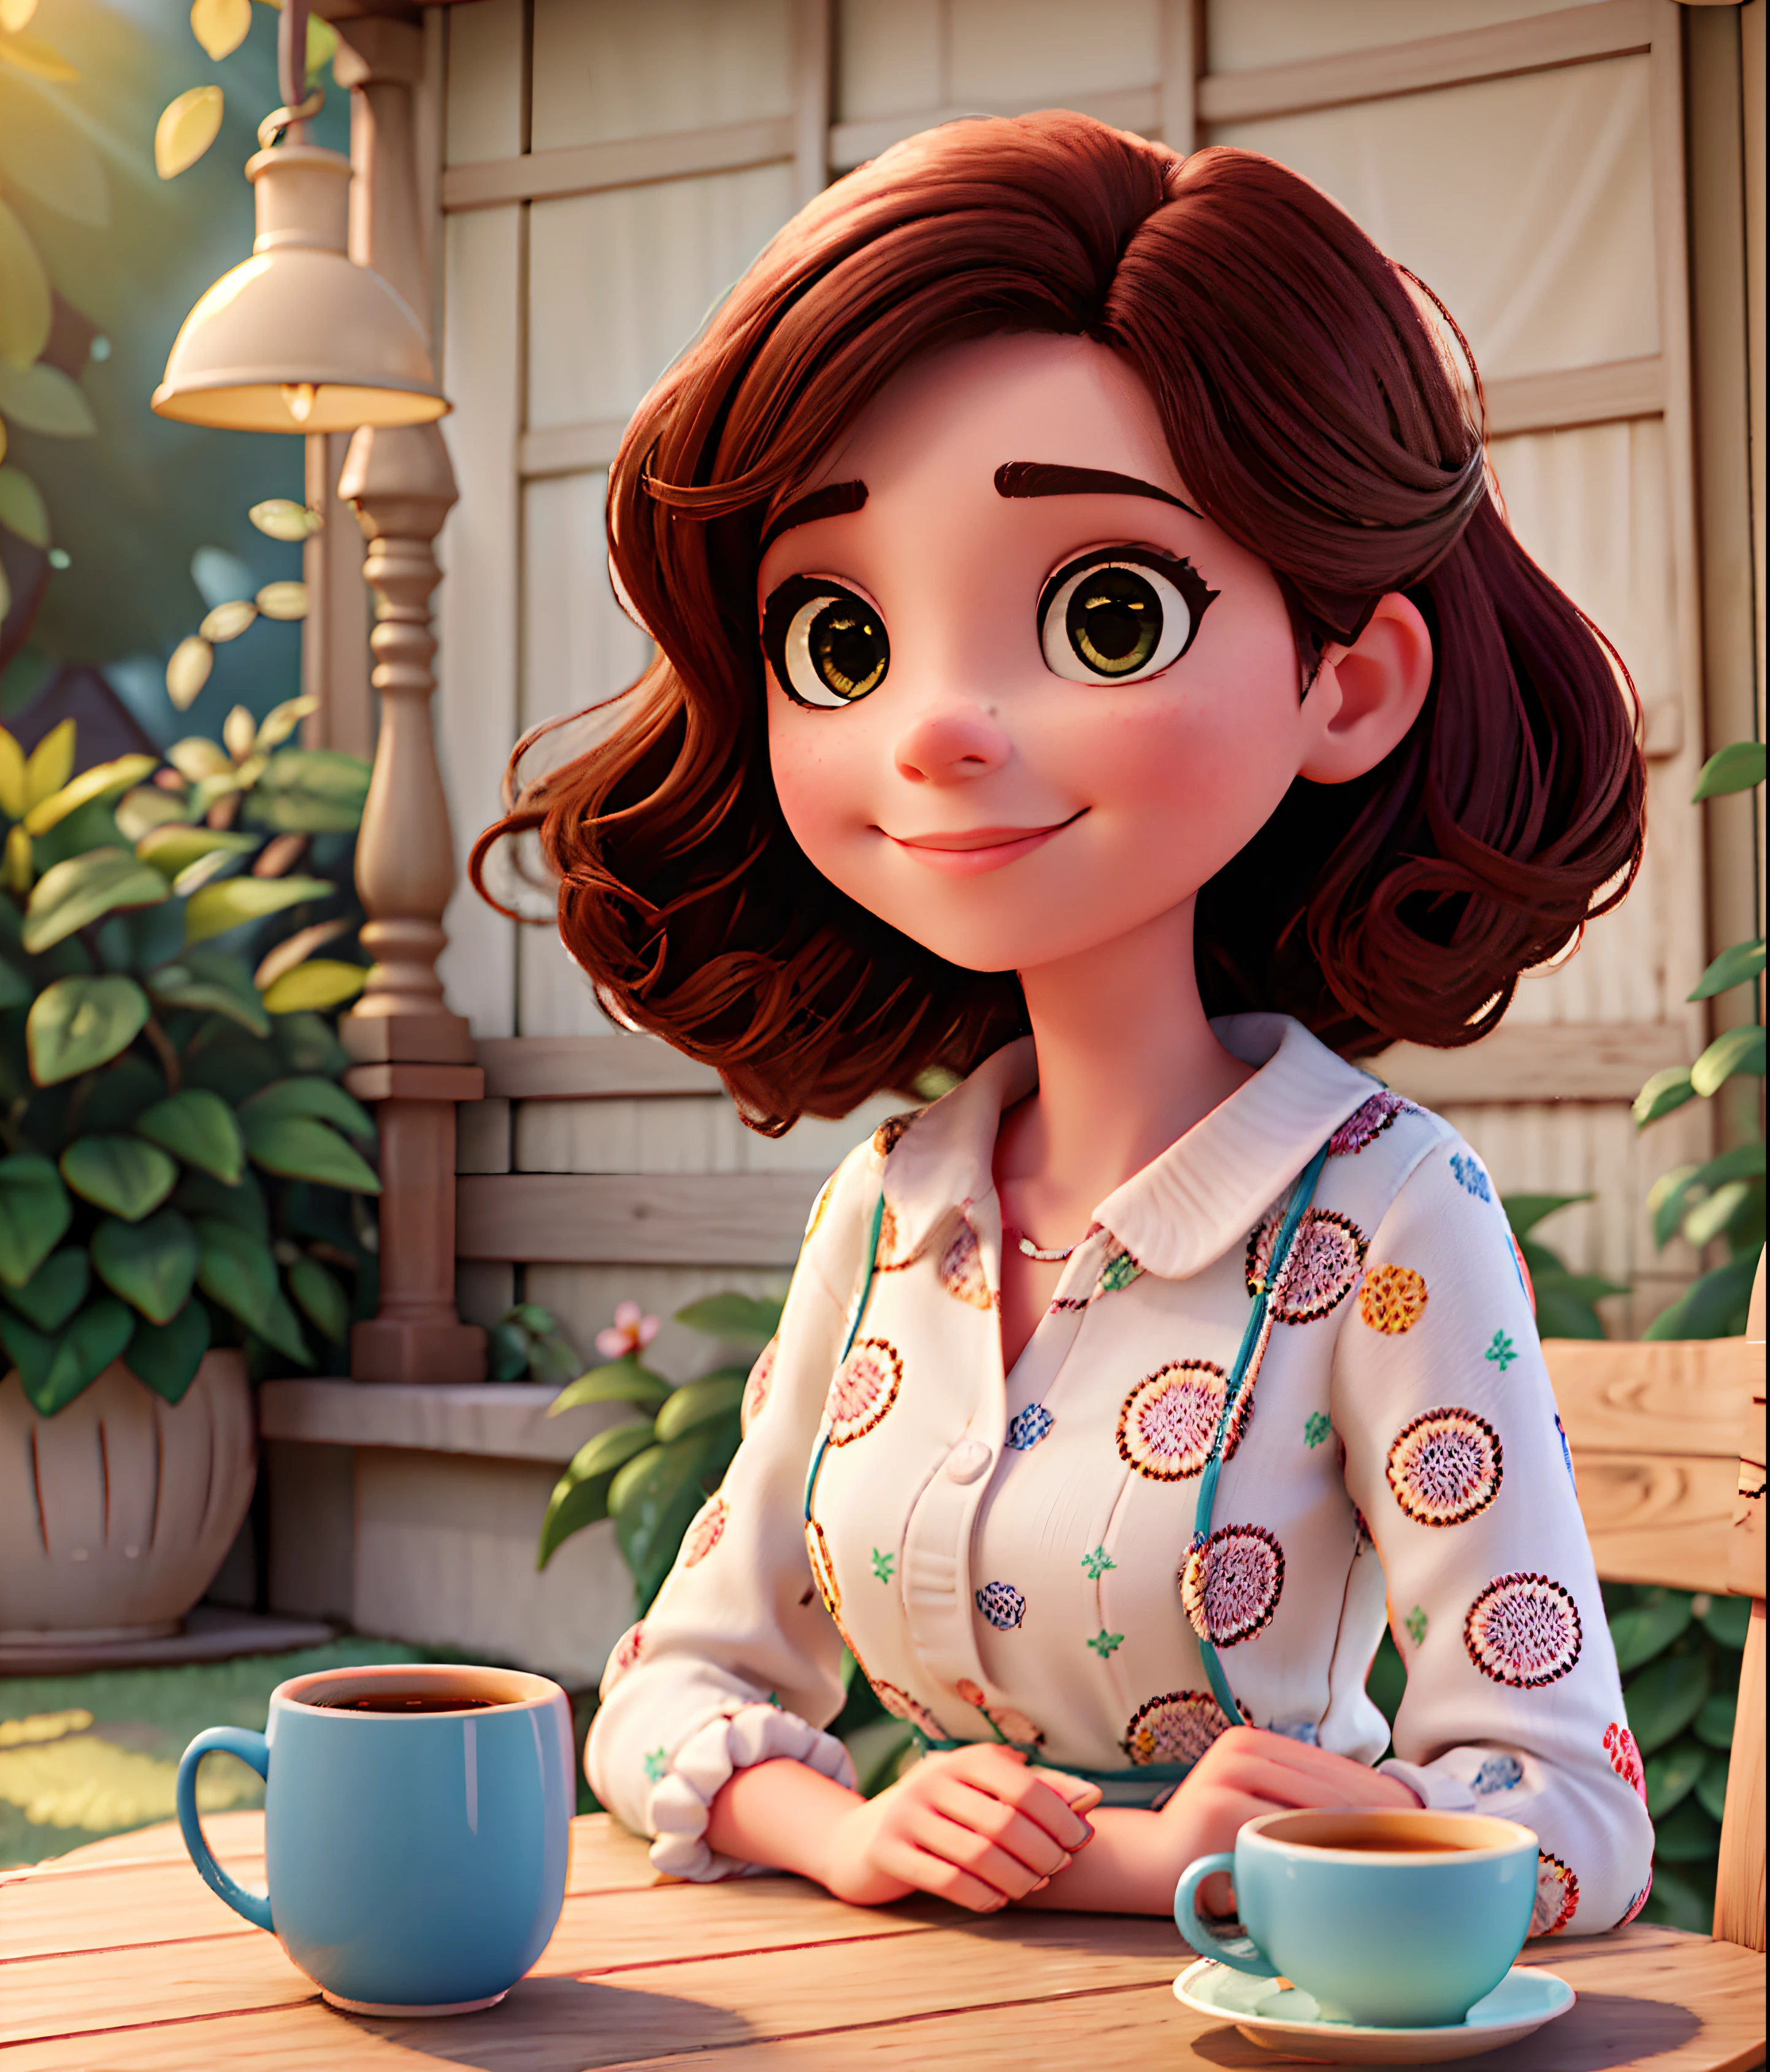 Pompt Disney pixar Beautiful Brazilian woman sitting and drinking coffee at garden table of her house Cute face, very black straight hair straight cut reaching the shoulder and with a fringe. Japanese style hair with brown eyes and very rosy cheeks, Wearing a polka dot dress covering her lap looking at you with loving eyes and a soft smile, shallow depth of field, Cinematic light, smooth light, back-illuminated, micro-details, rendering, photorrealistic, cinemactic, 85mm 1.4